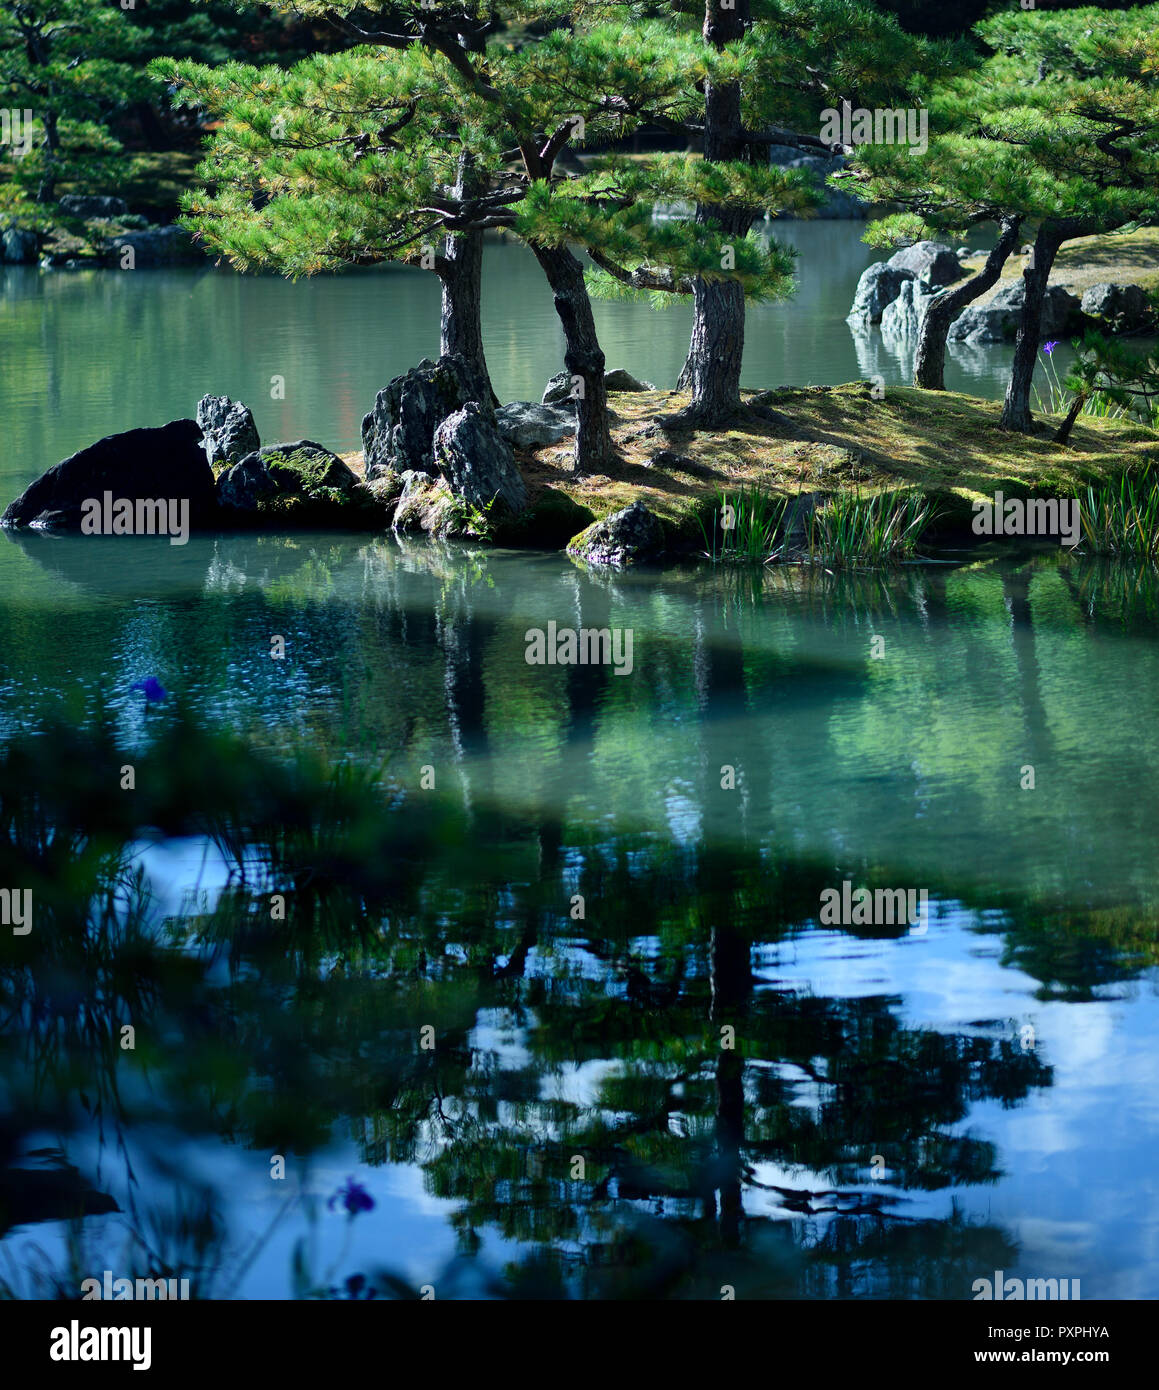 Peaceful scenery of pine trees on an island in a pond of a Japanese Zen garden with beautiful reflections in water. Rokuon-ji temple, Kyoto, Japan. Stock Photo